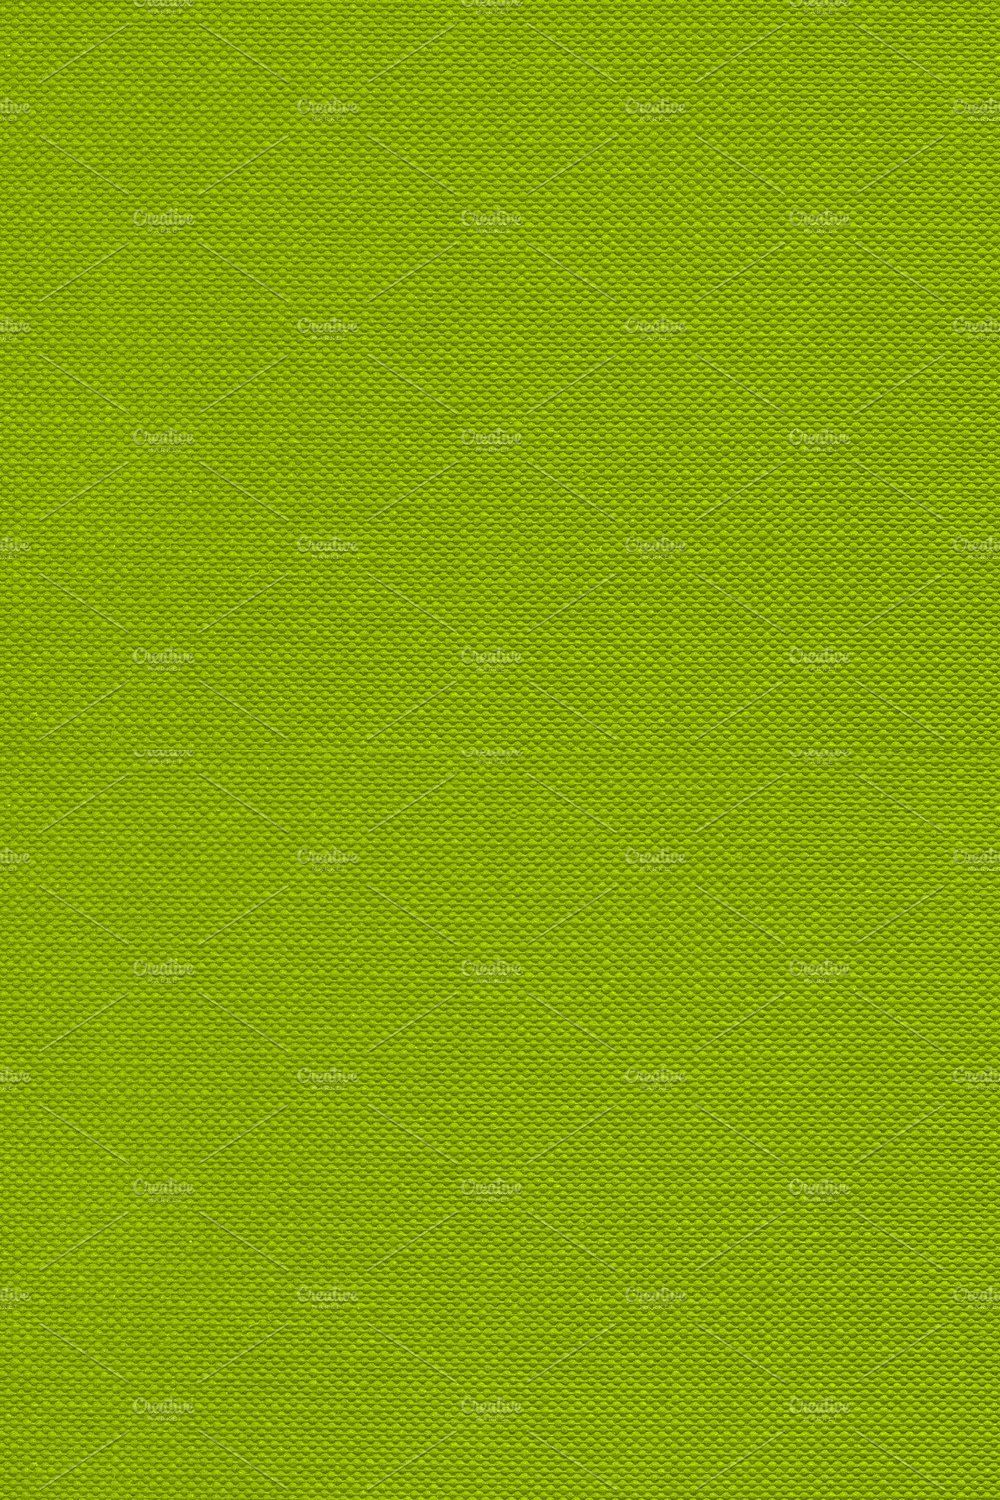 Green canvas texture background pinterest preview image.